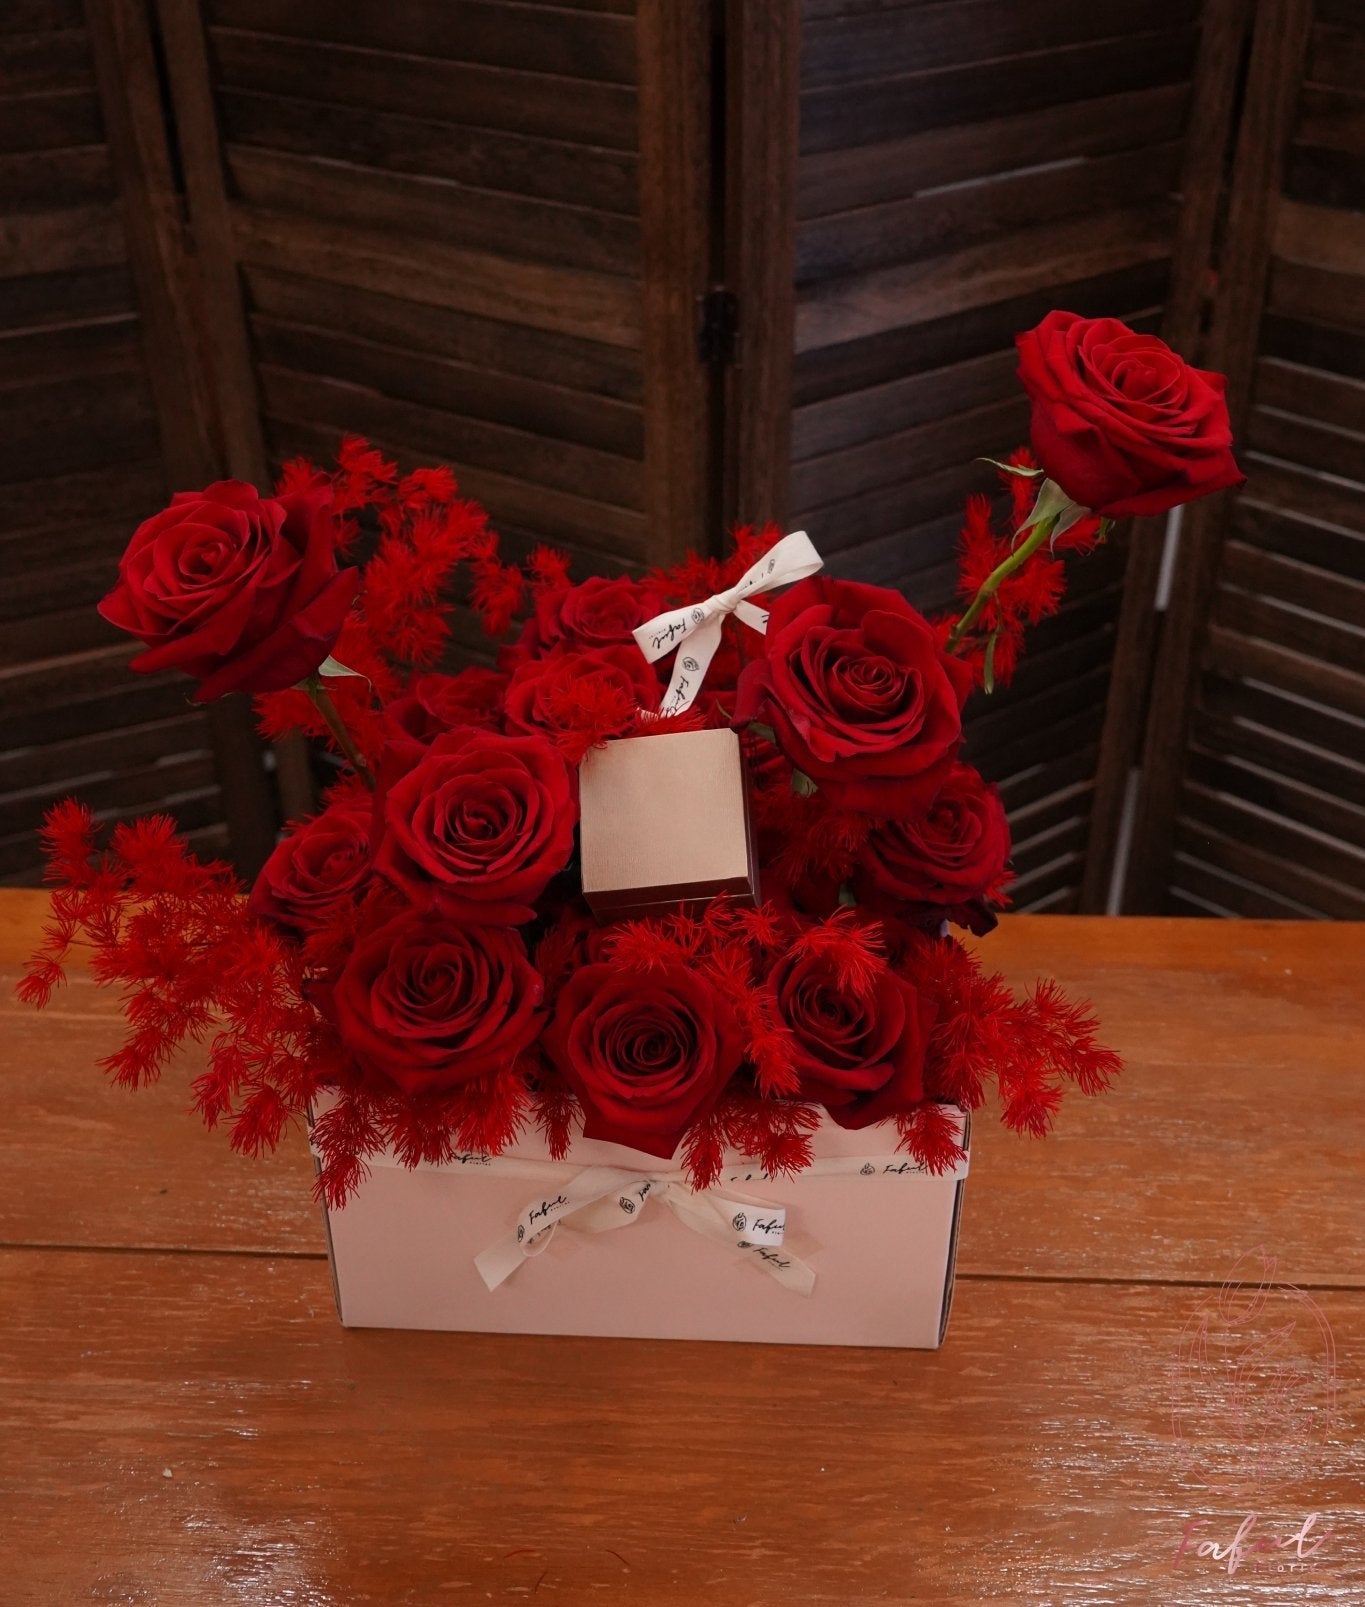 Red Romance | Red Rose - Fresh flowers, Roses- Red Romance - Feather - Anniversary - Romance - Rose - 3